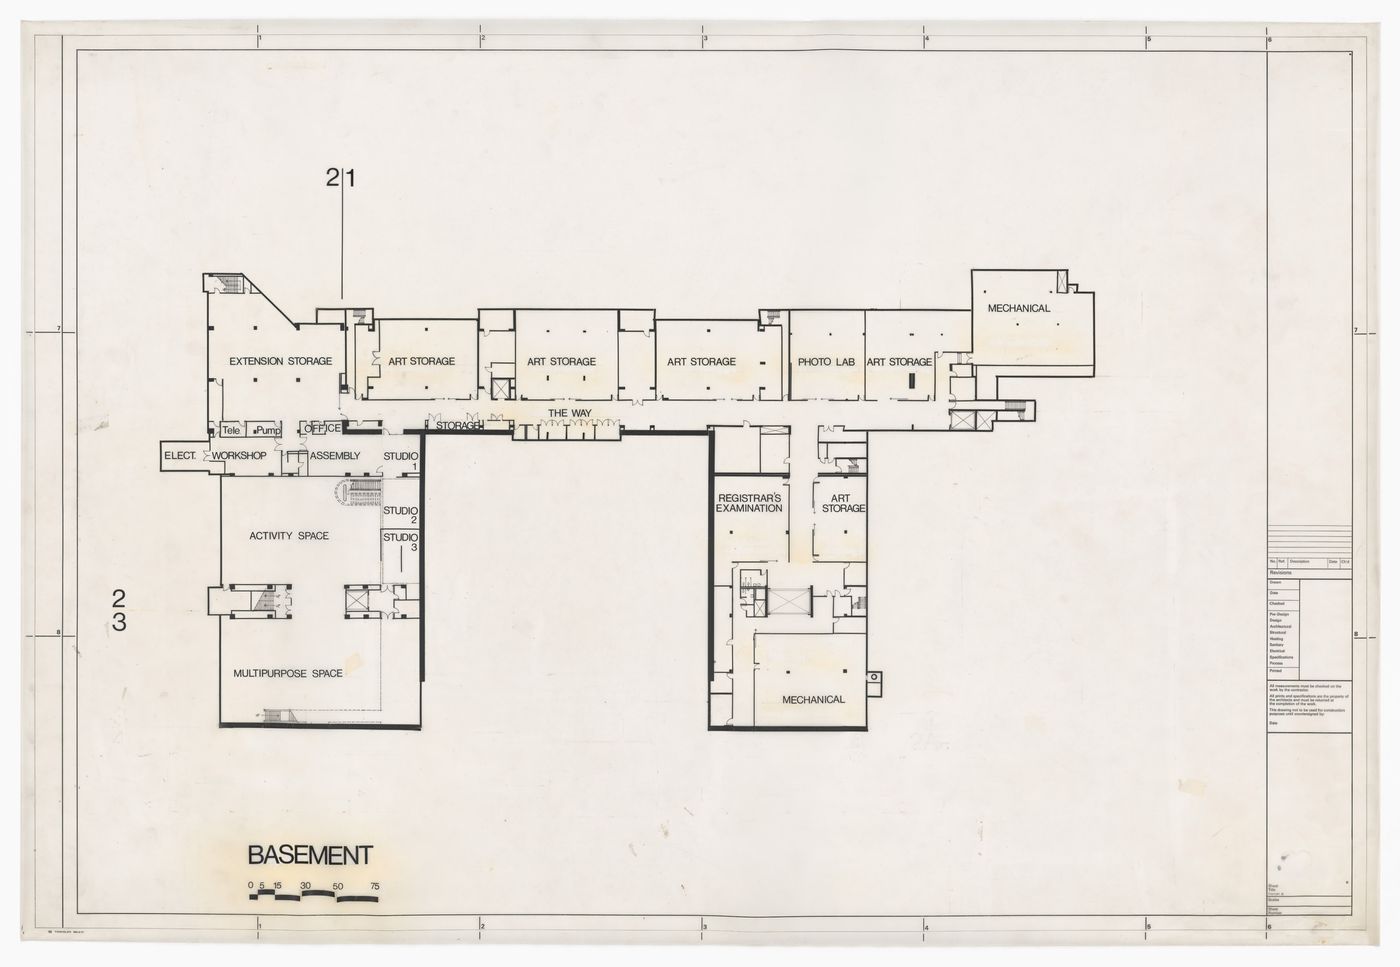 Basement plan for Art Gallery of Ontario, Stage II Expansion, Toronto